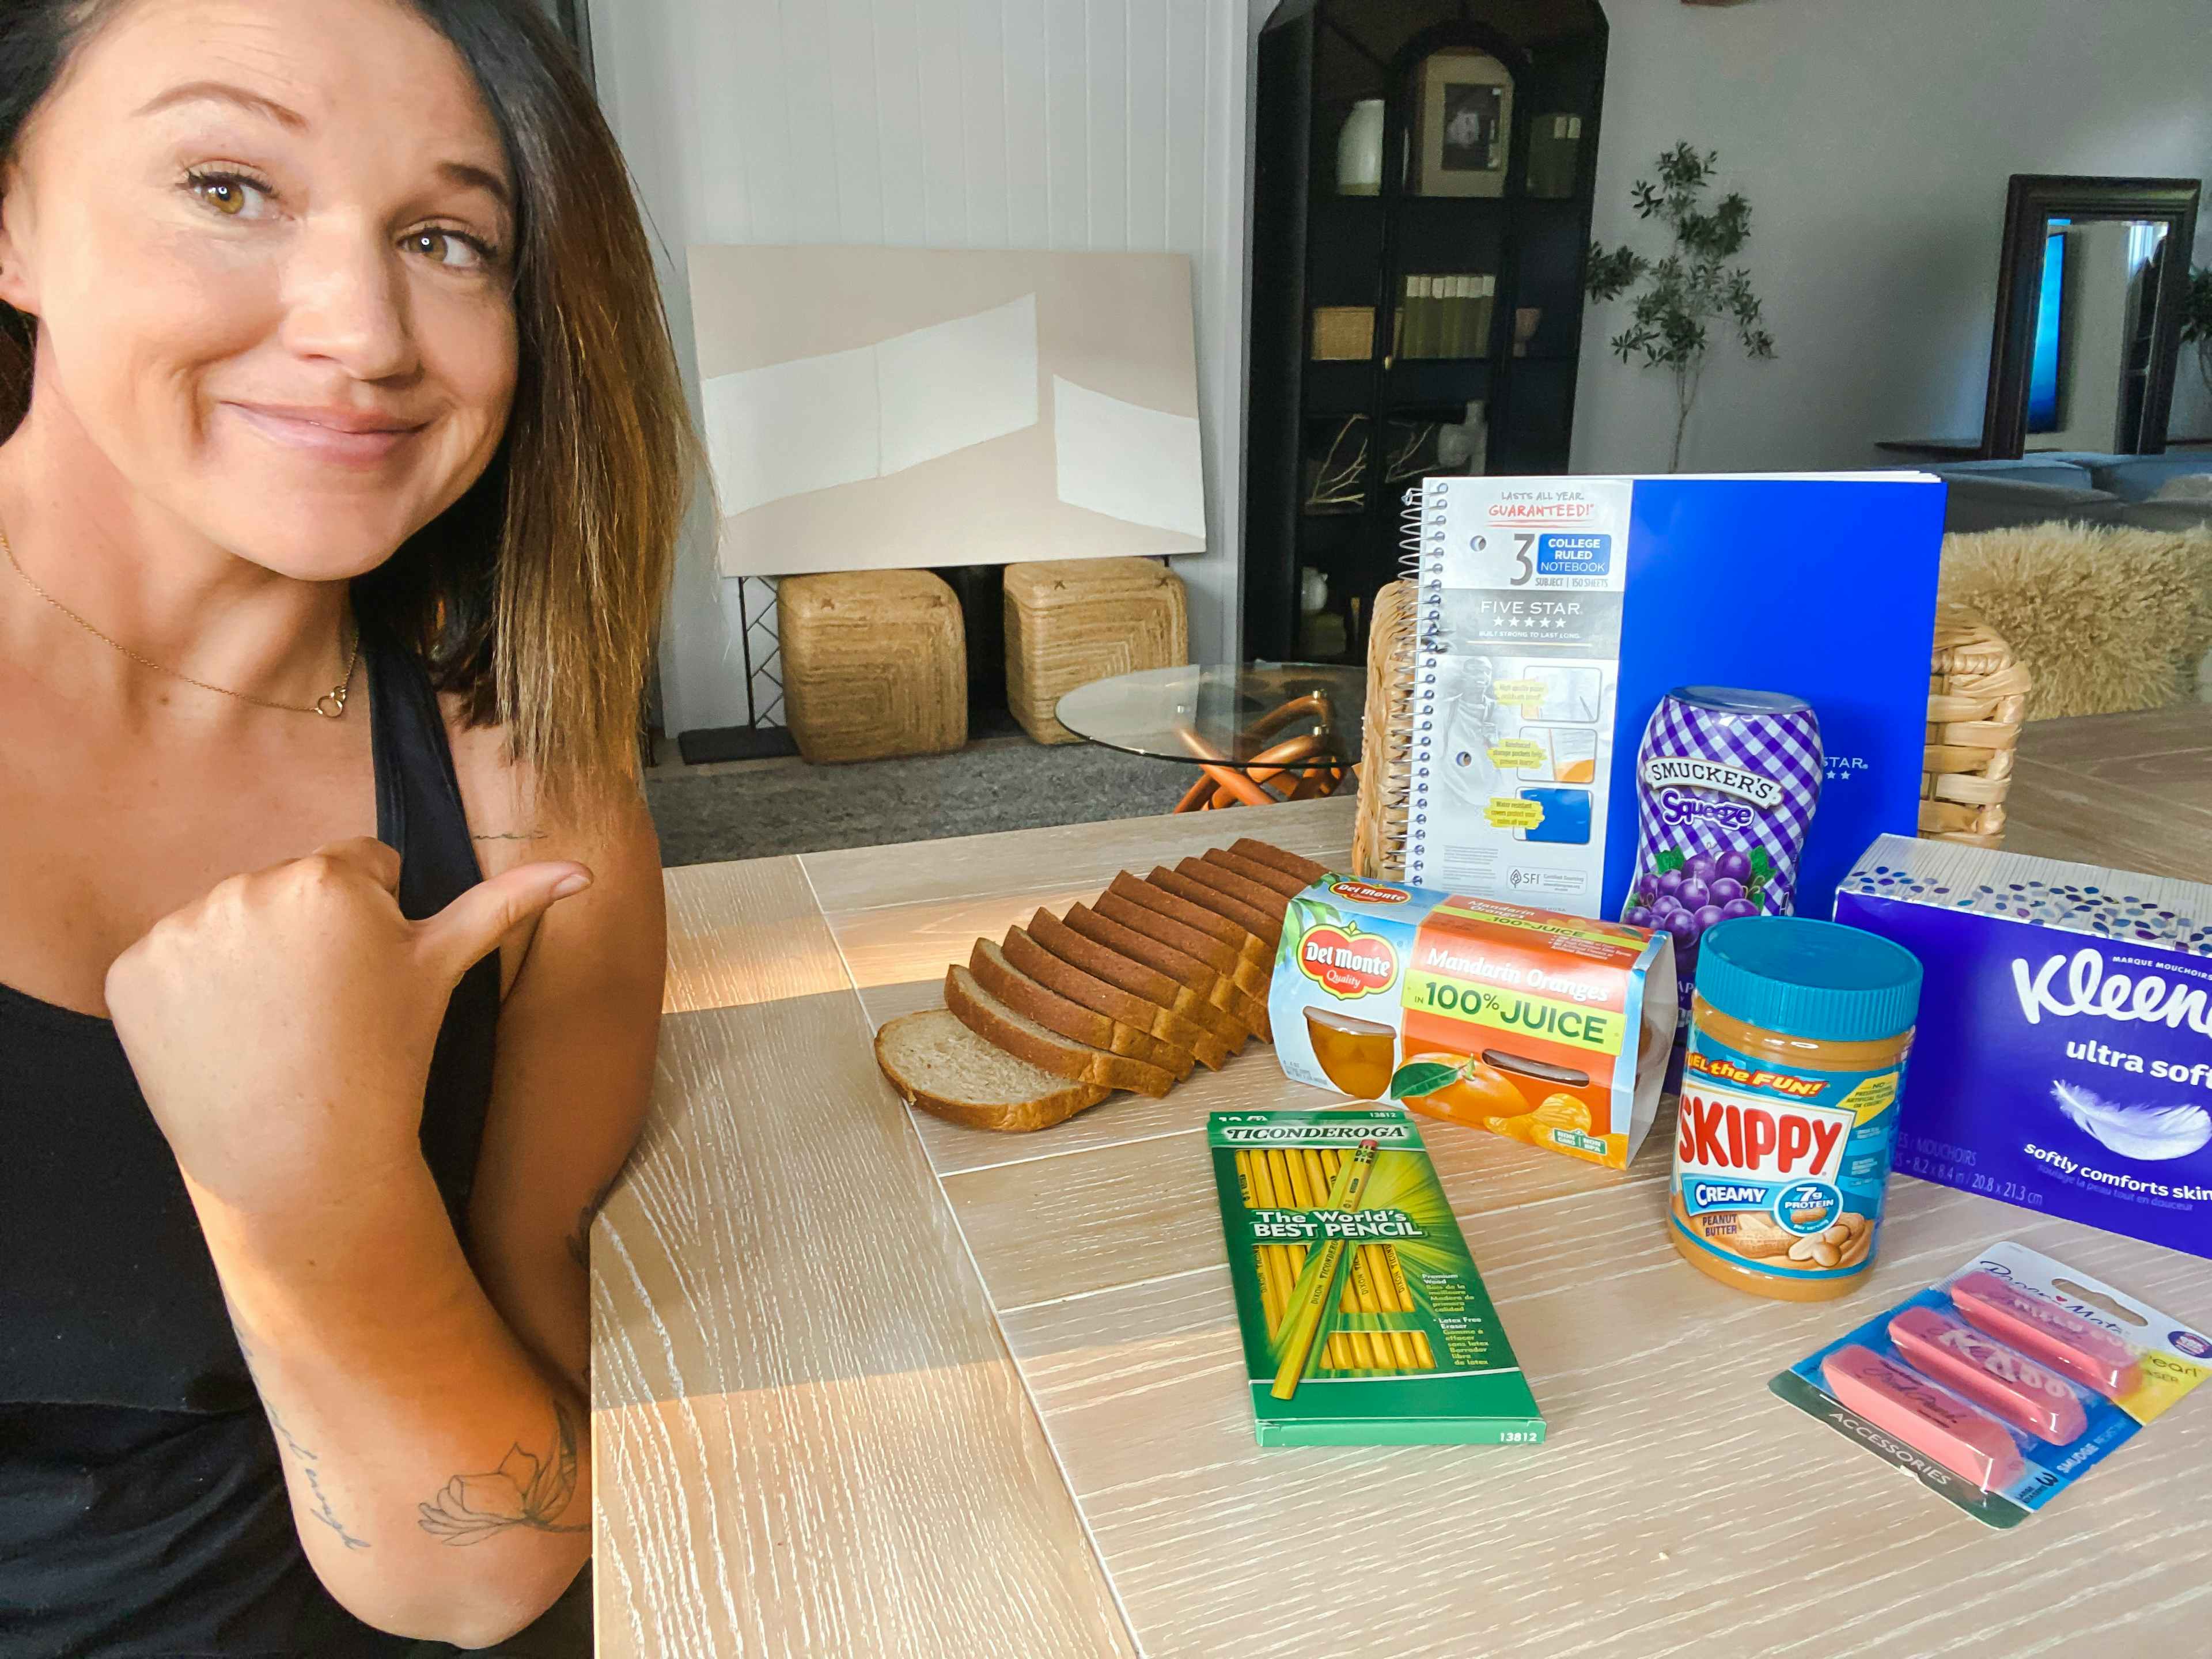 Woman sitting and pointing her thumb at some school supplies, bread, peanut butter, jelly, and a box of Kleenex on the table next to her.